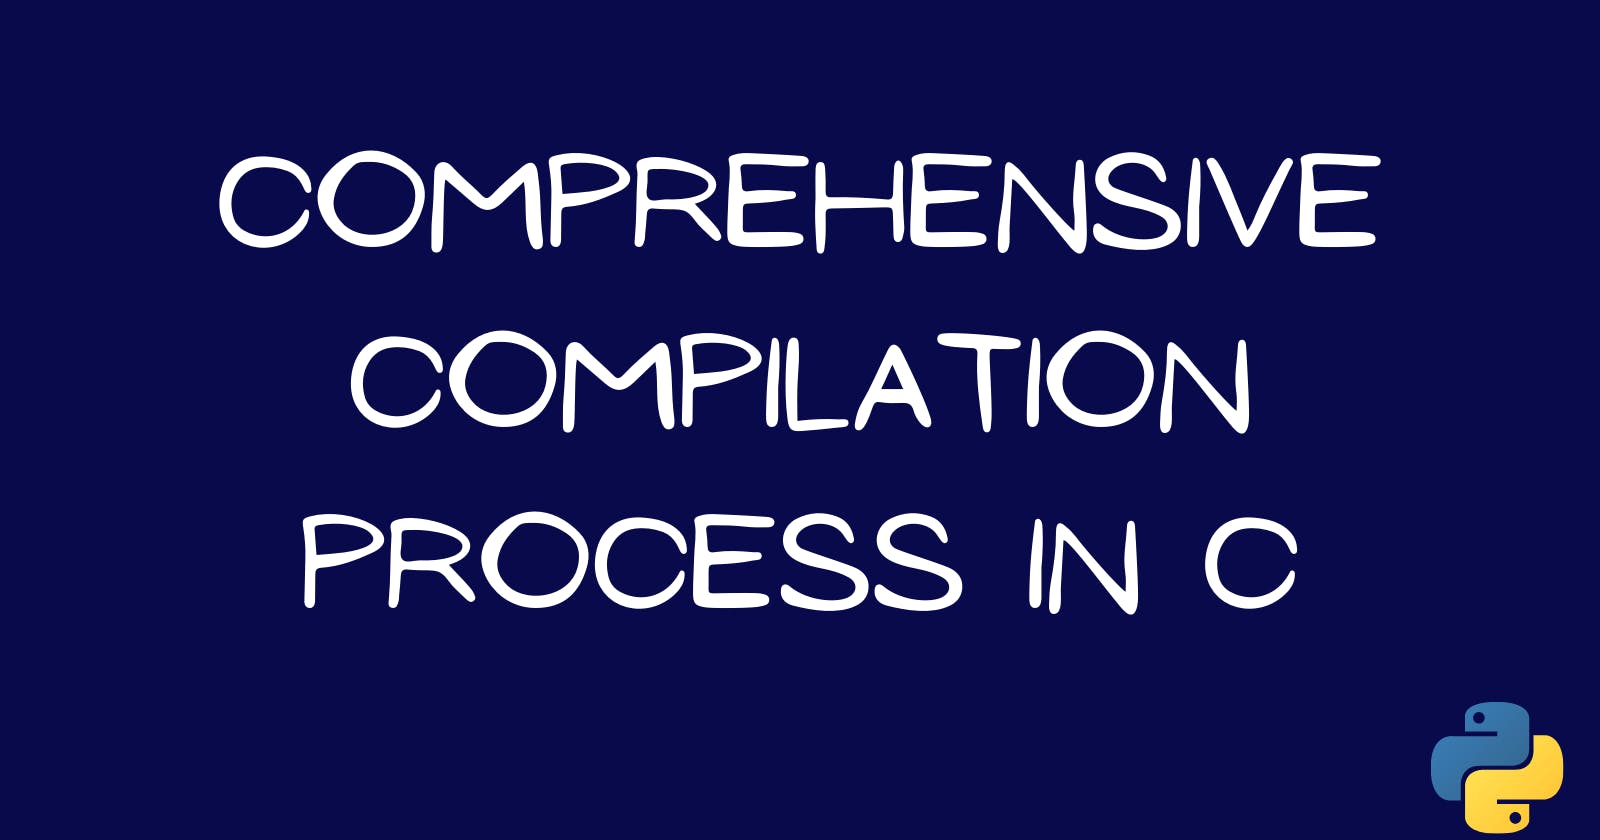 Comprehensive Compilation Process in C